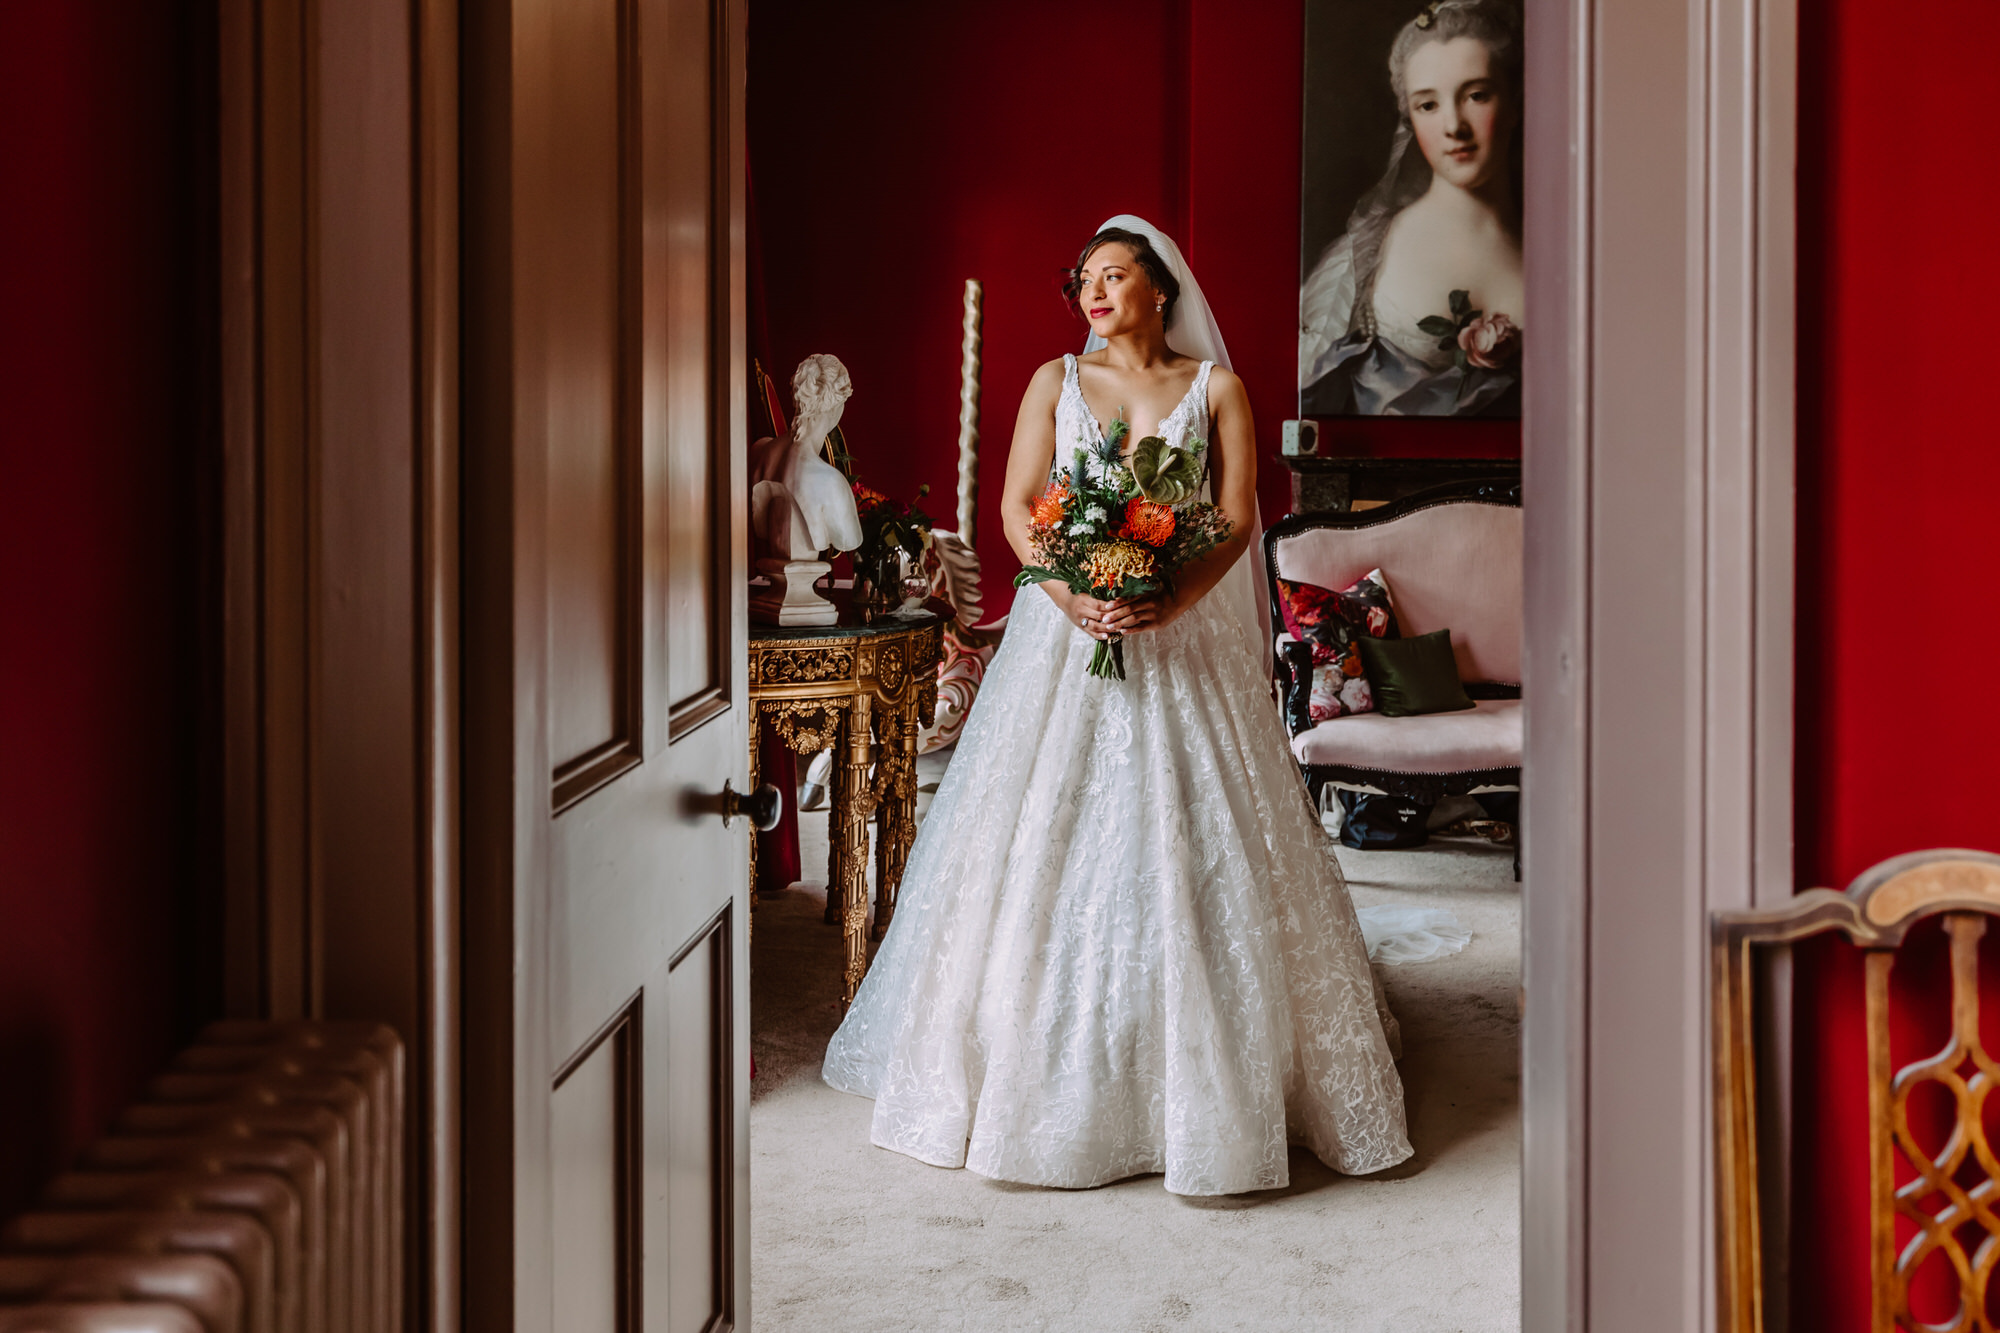 Portrait of bride looking out the window holding bouquet